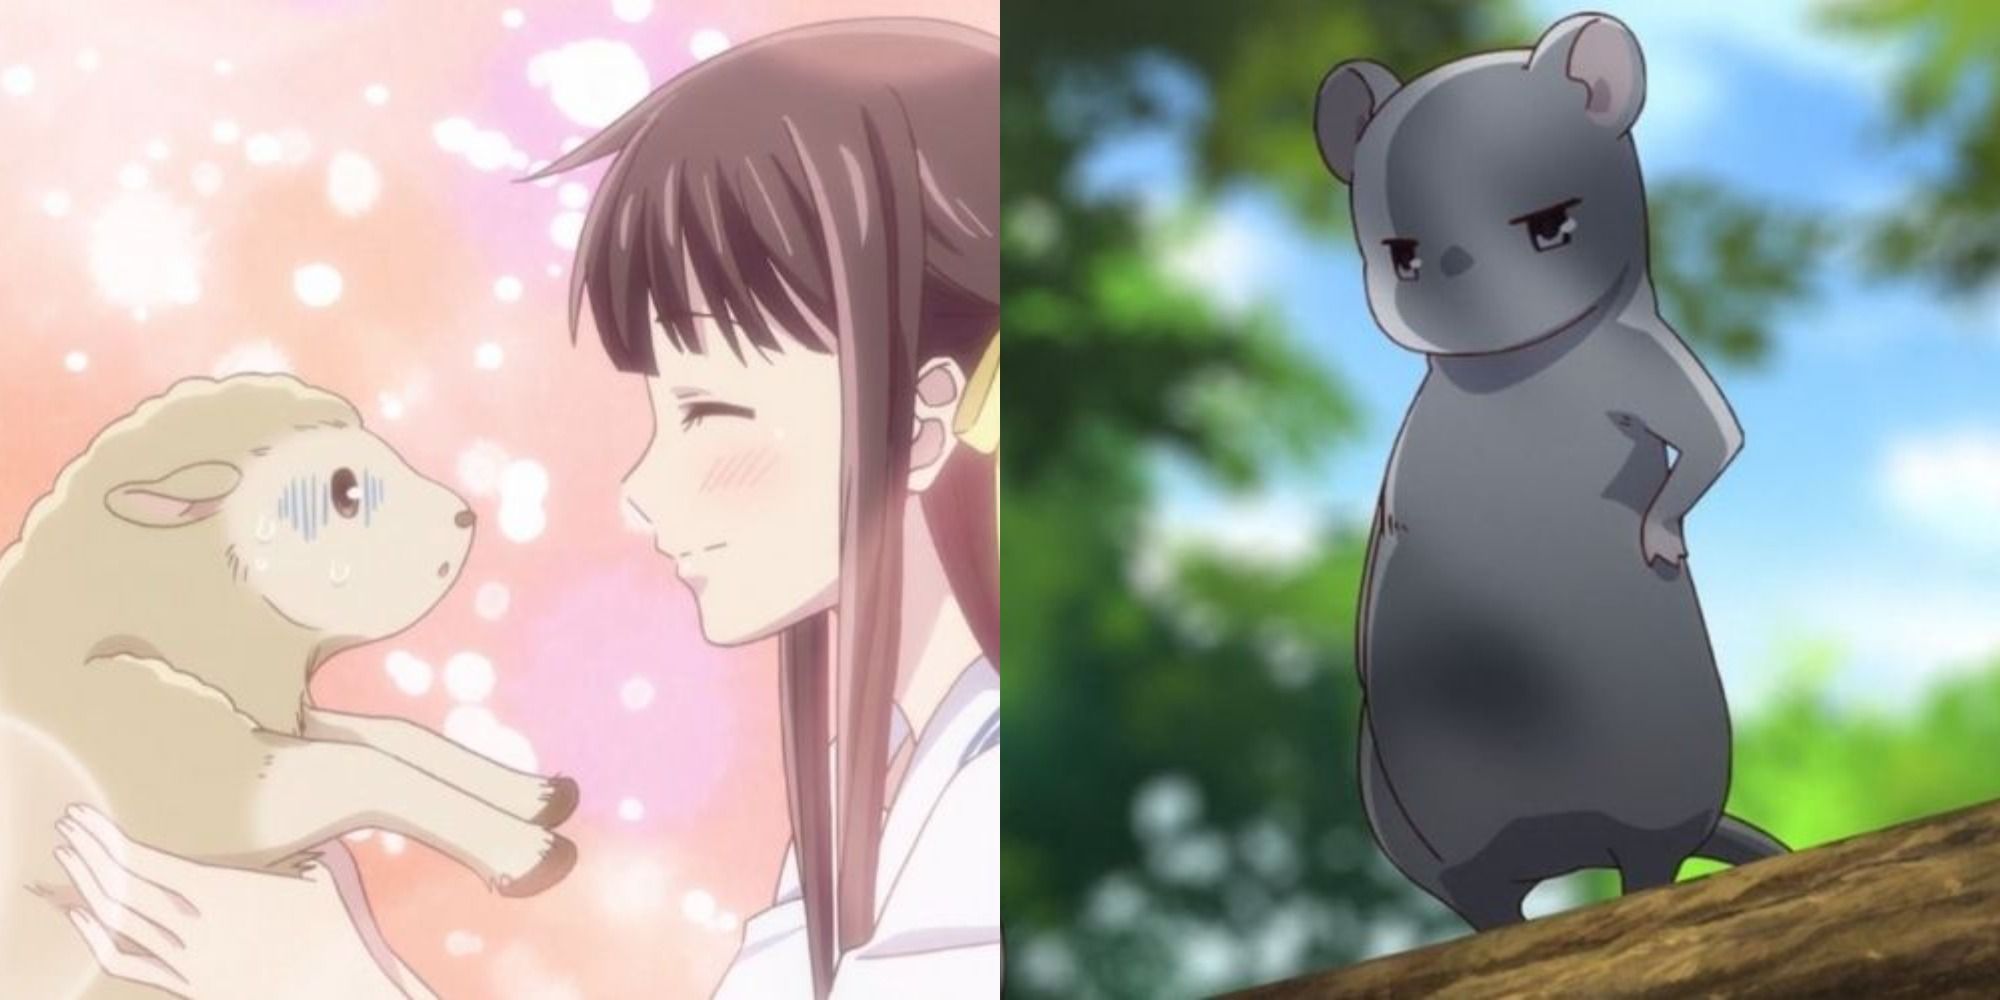 Chinese Zodiac Signs Of Fruits Basket Characters